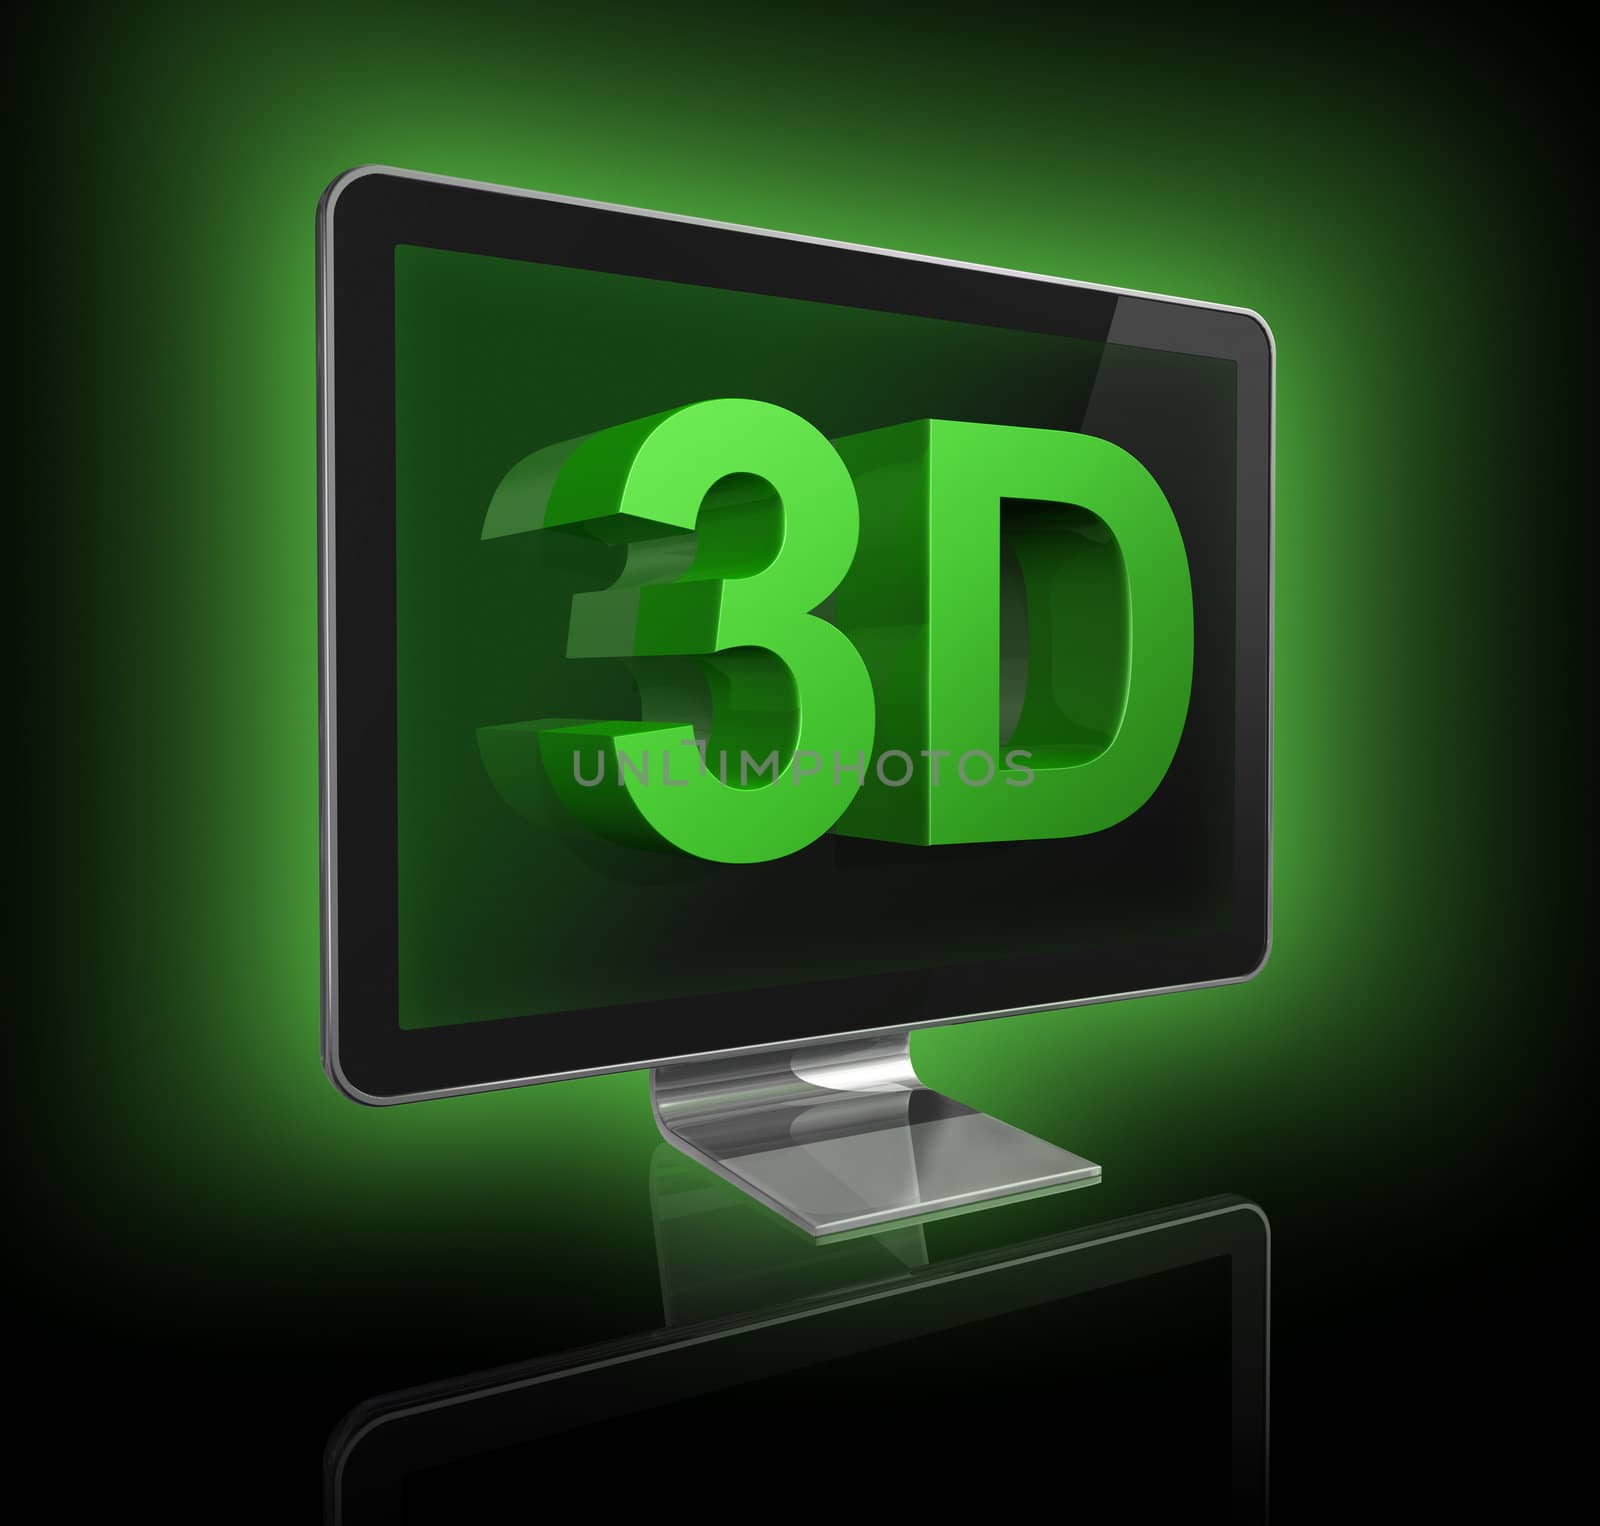 3D television screen with 3D text by daboost